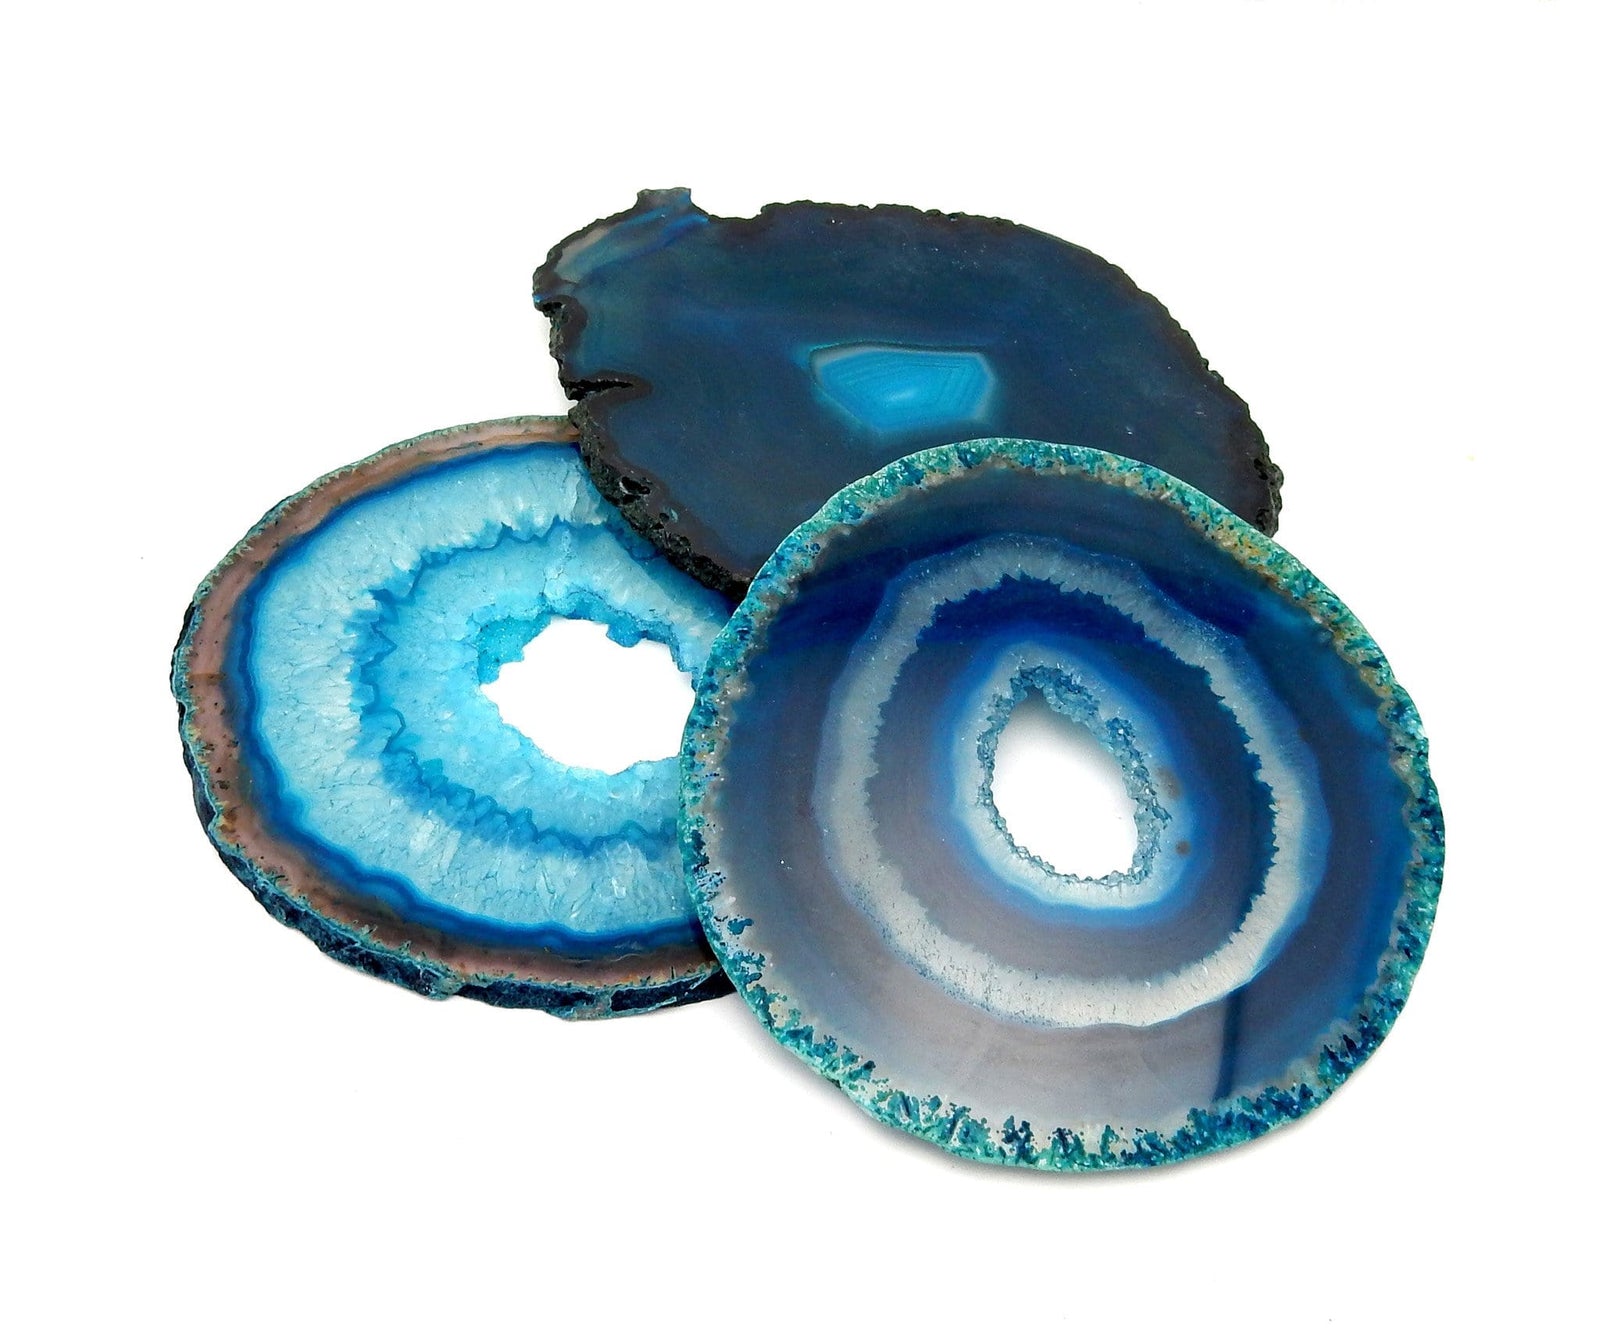 Teal Agate Slice - Agate Slices #5 - Great for Coasters and Home Decor